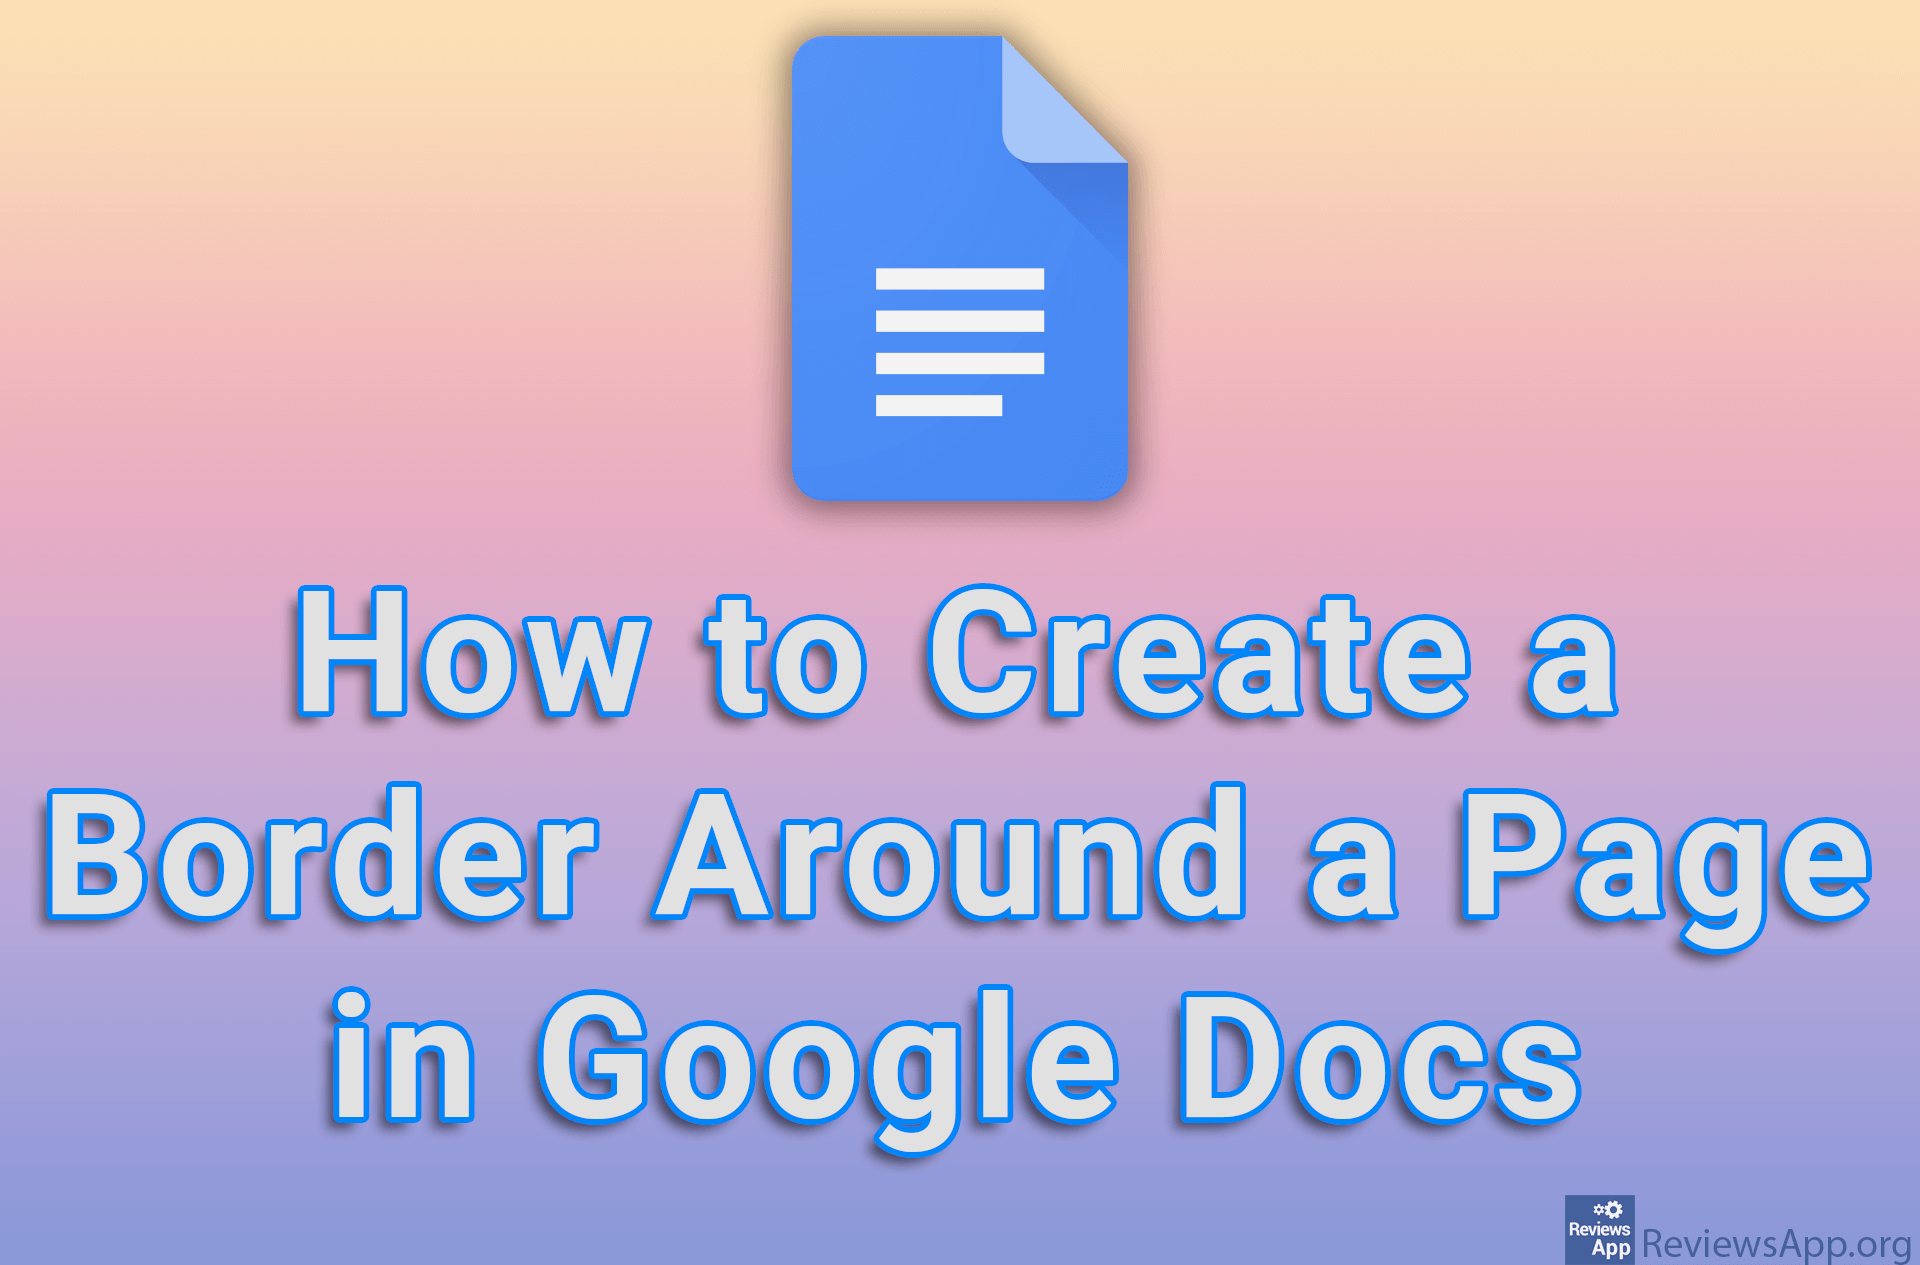 how-to-create-a-border-around-a-page-in-google-docs-reviews-app